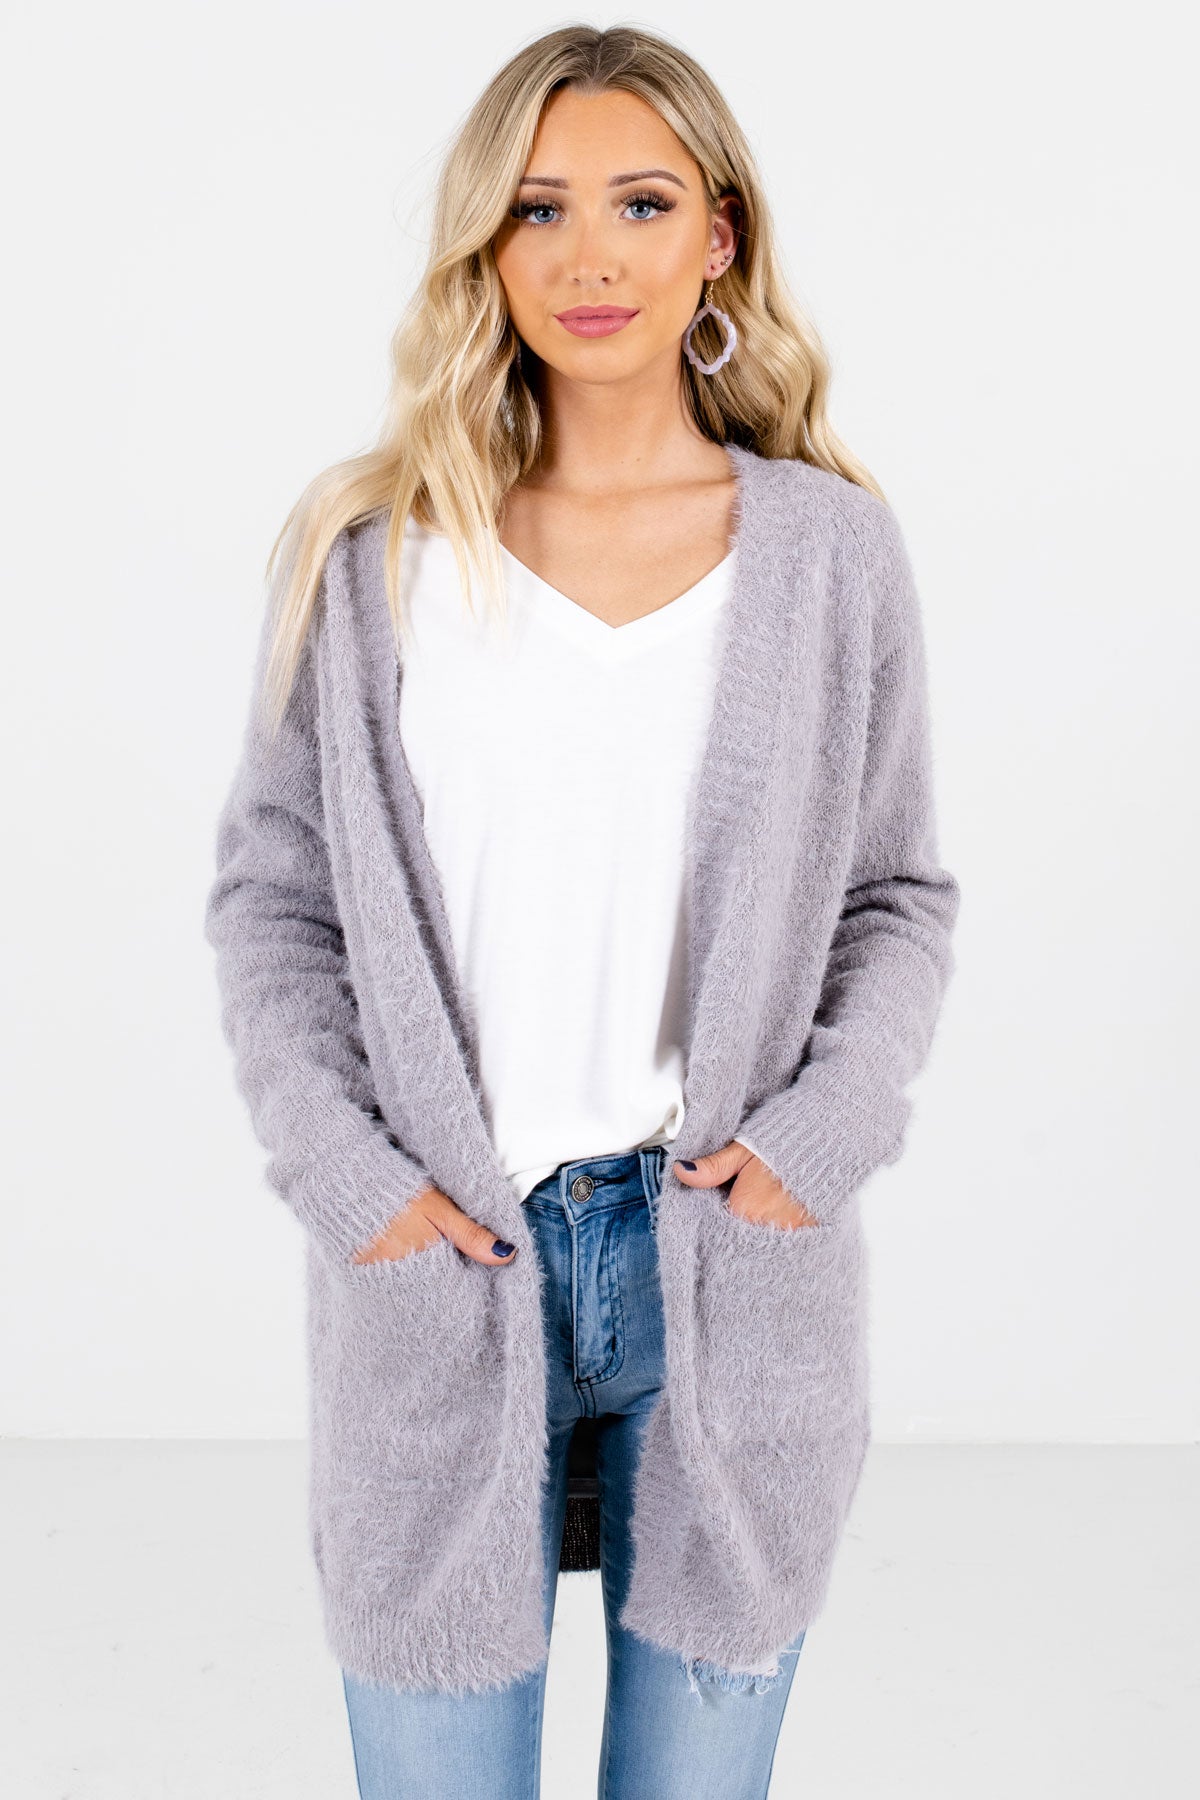 Light Gray High-Quality Fuzzy Knit Material Boutique Cardigans for Women